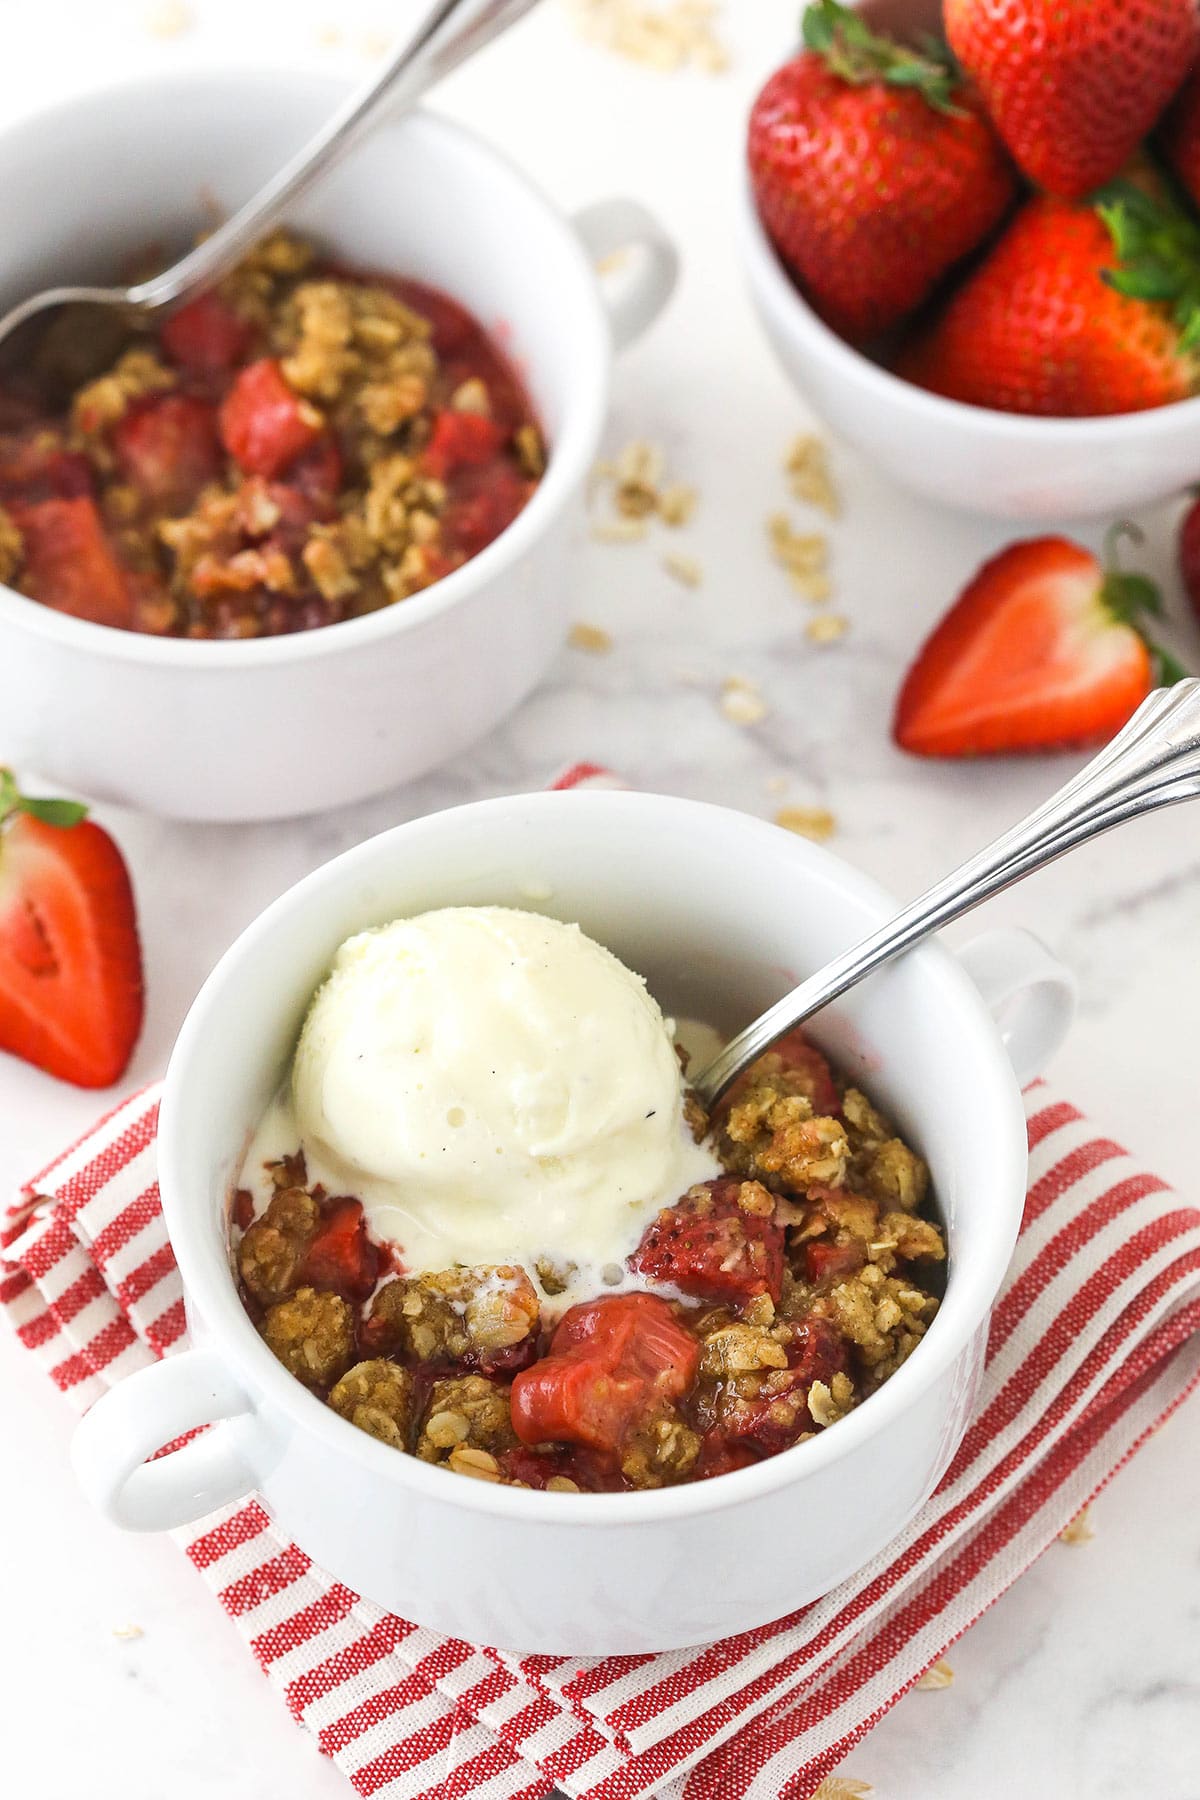 strawberry rhubarb crisp with a scoop of ice cream on top on a red and white striped napkin